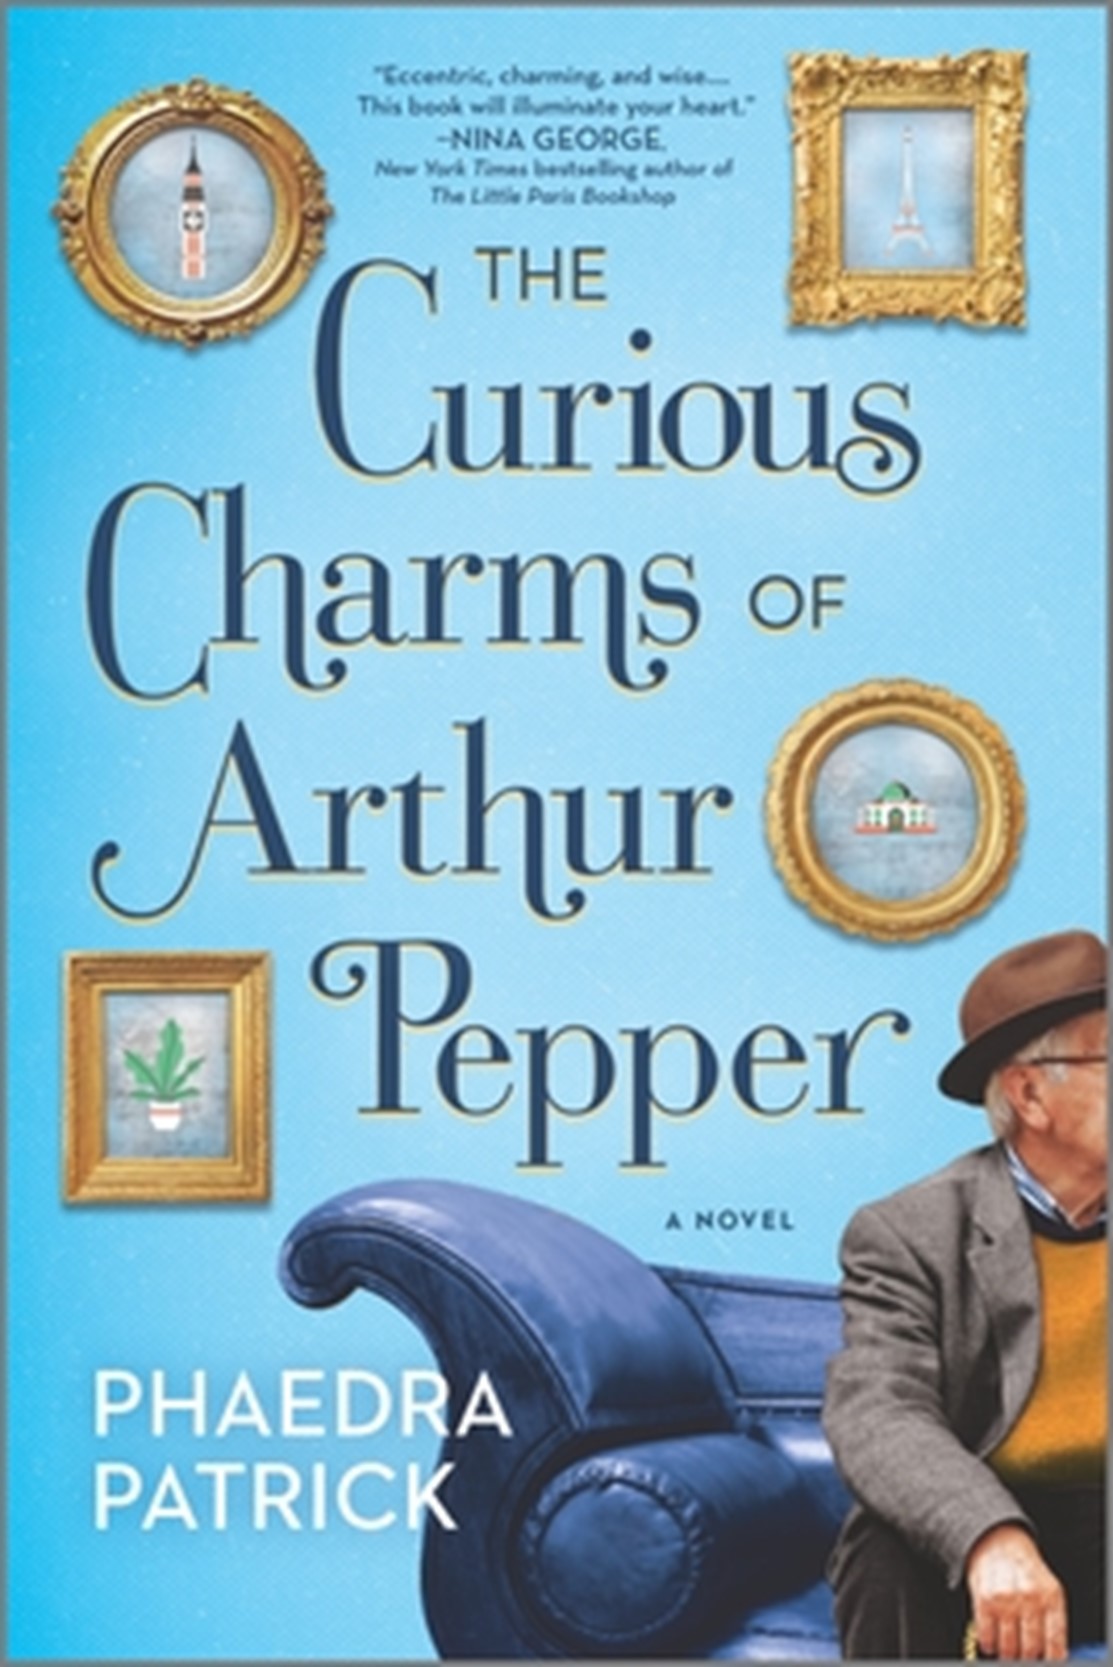 The State Library of Pennsylvania Presents a Virtual Author Talk: Phaedra Patrick and “The Curious Charms of Arthur Pepper”